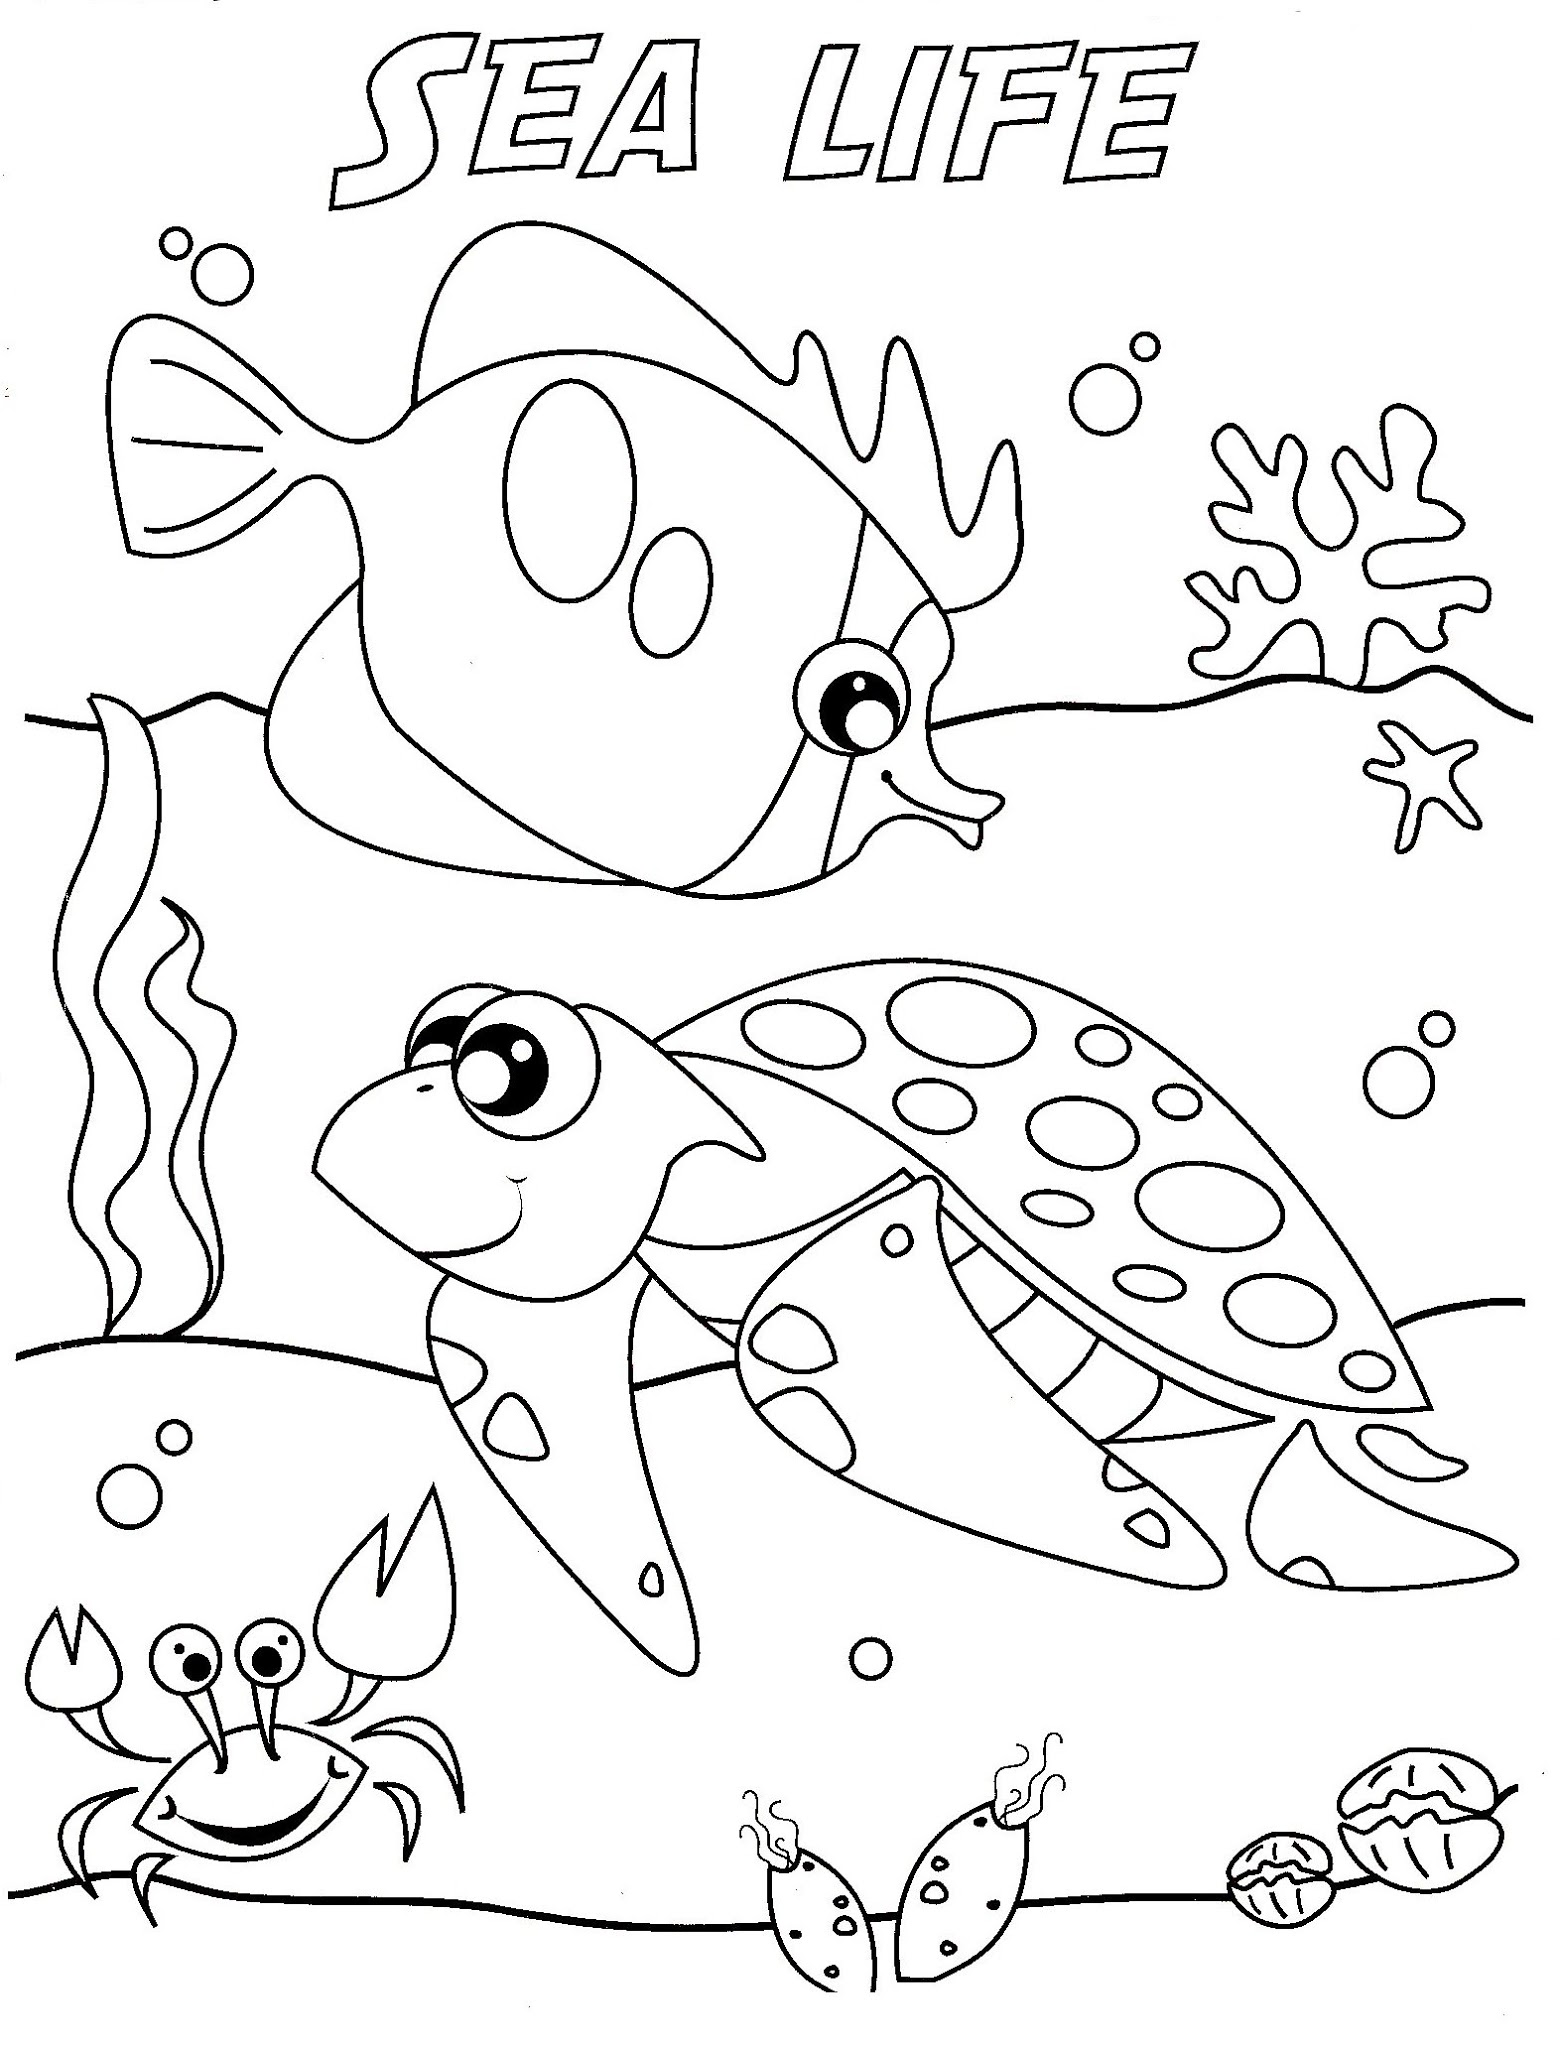 under-the-sea-coloring-pages-for-kids-153-svg-file-for-silhouette